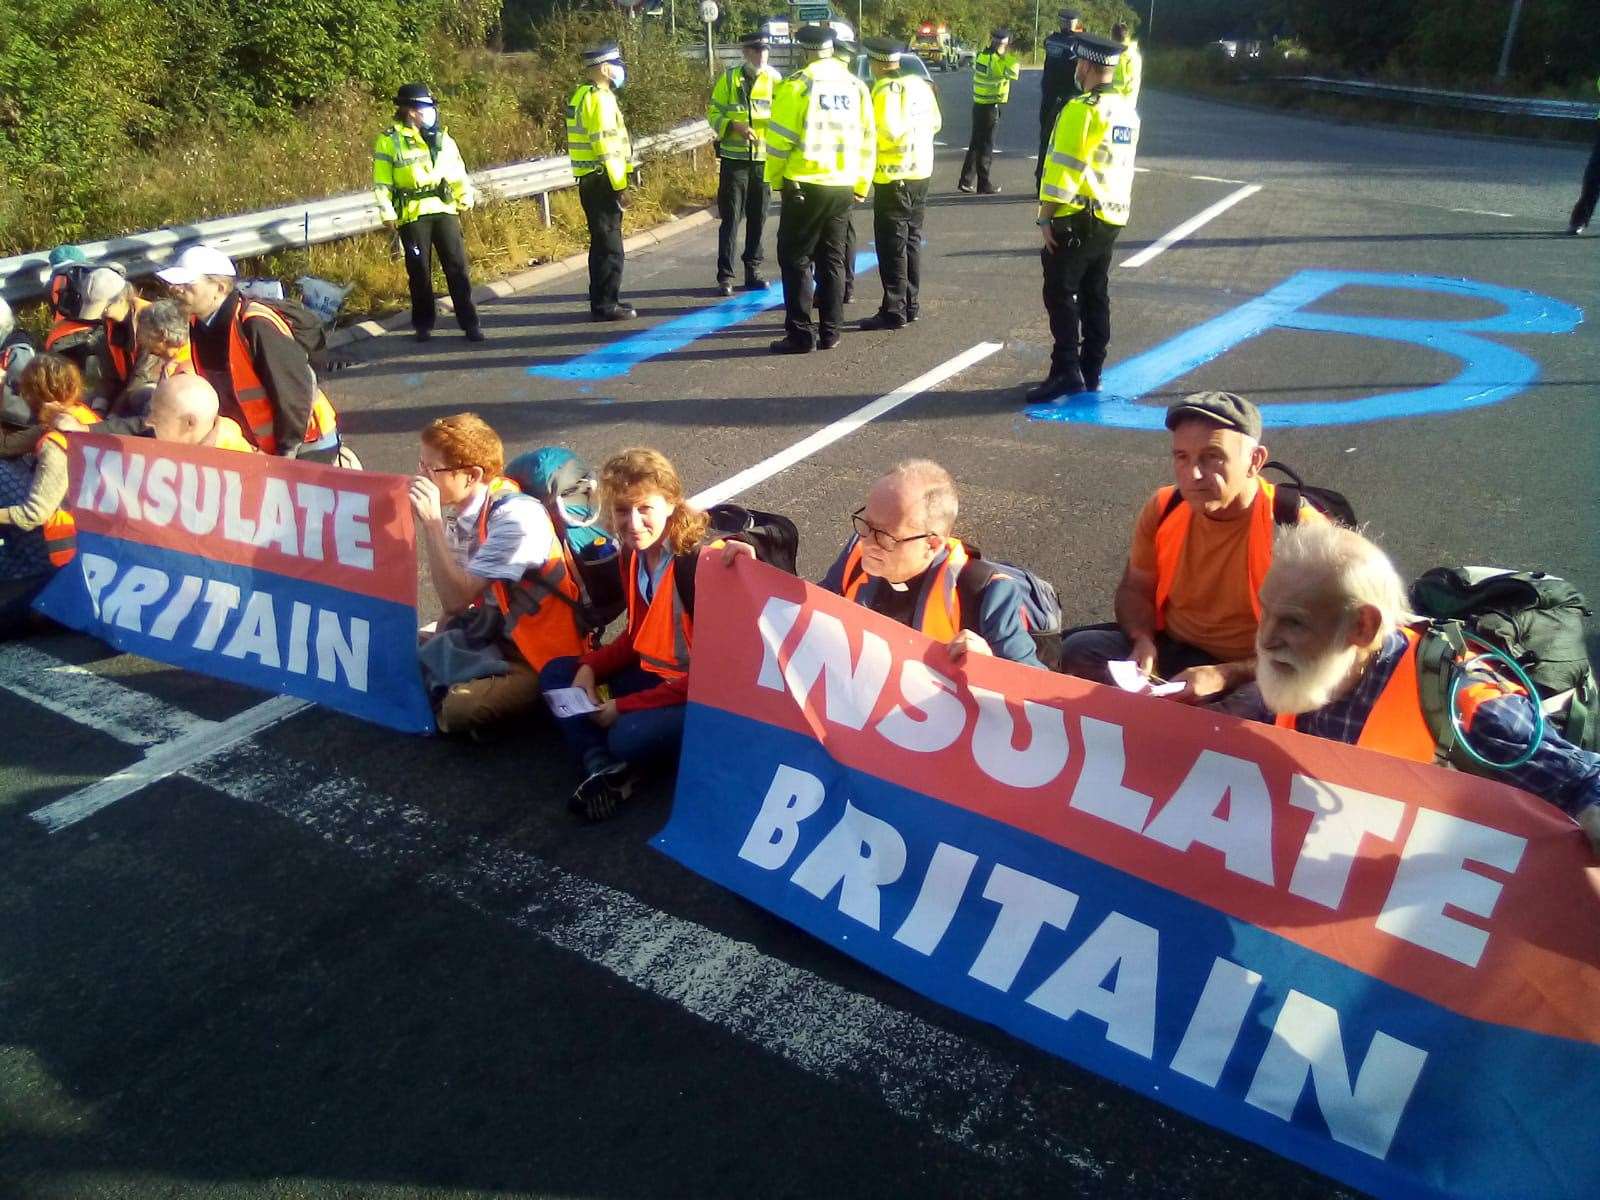 Insulate Britain protesters disrupt an M25 junction on September 17, 2021. Picture: Insulate Drivers.